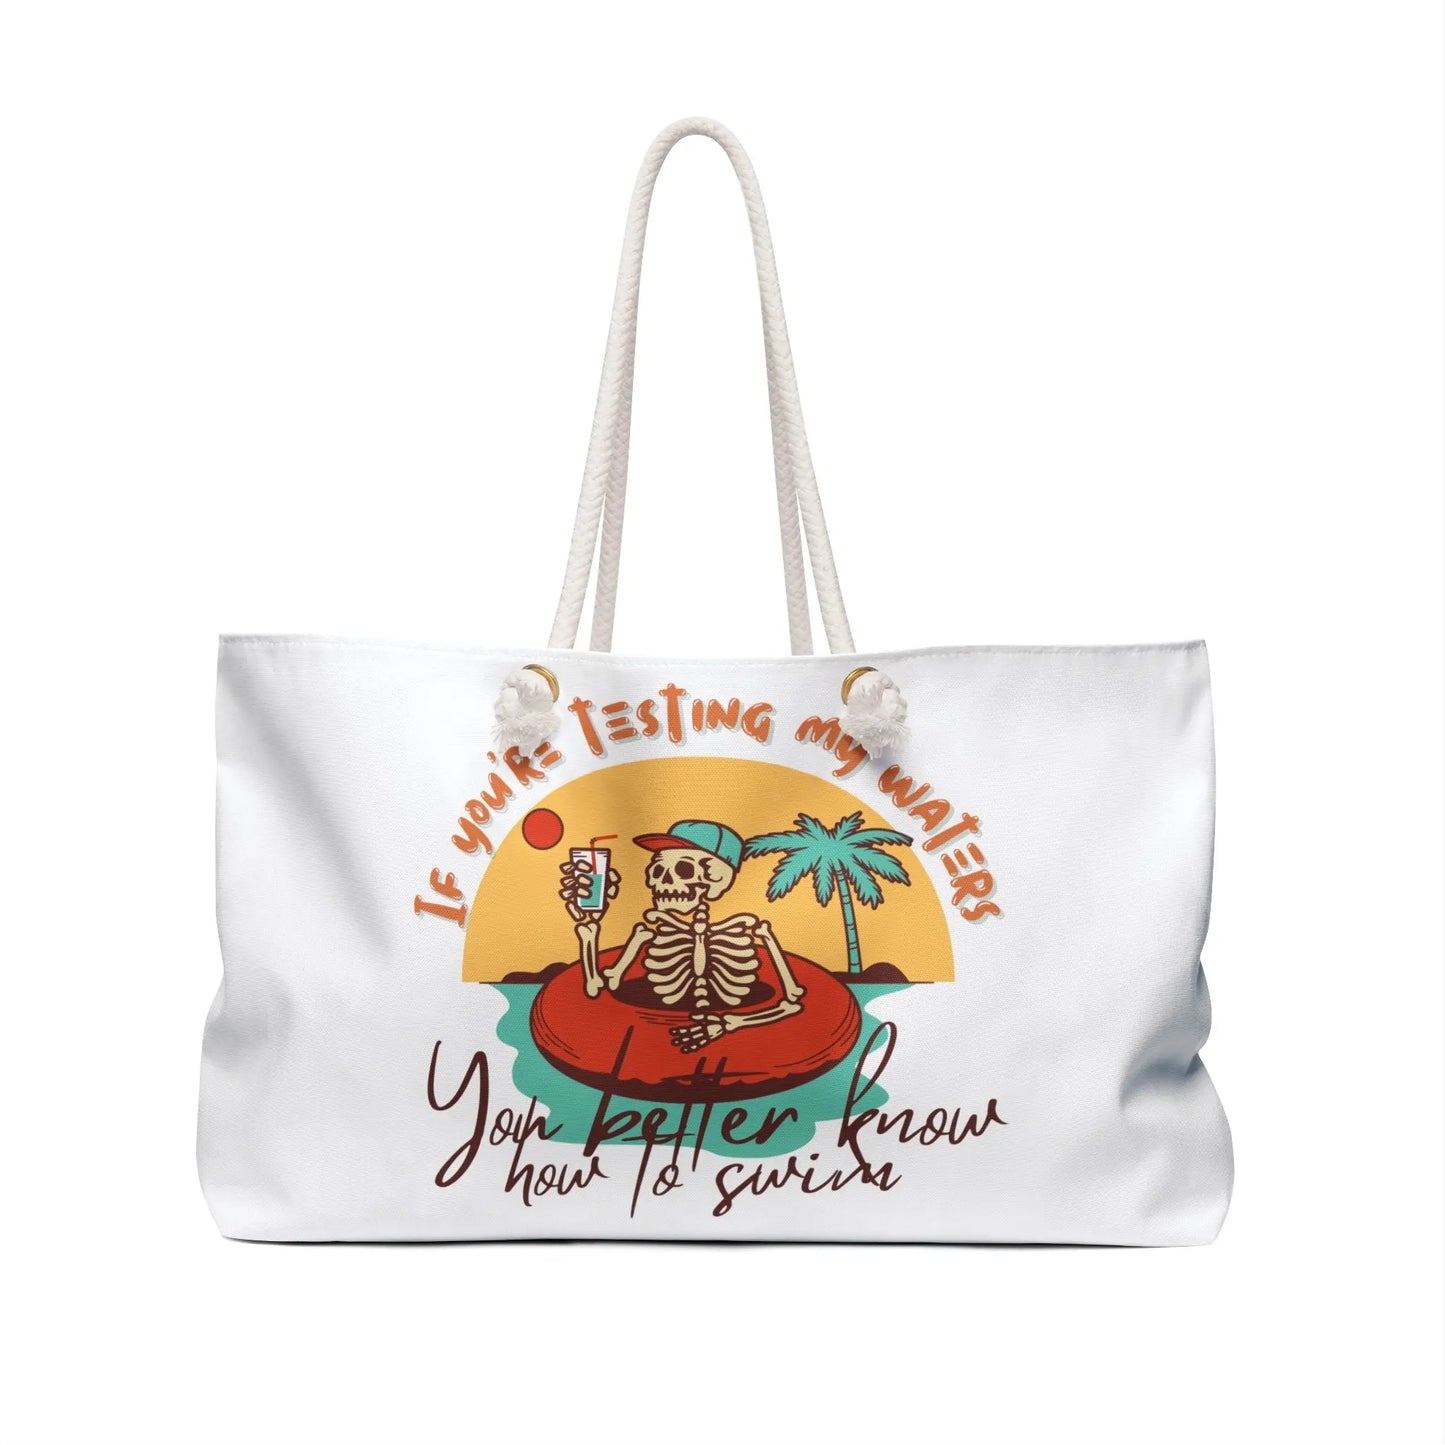 If you're testing my waters you better know how to swim funny sarcastic ocean summer beach pool bag tote vacation women trendy retro beach ocean Mother’s Day gift - Stay Tomorrow Needs You If you're testing my waters you better know how to swim funny sarcastic ocean summer beach pool bag tote vacation women trendy retro beach ocean Mother’s Day gift